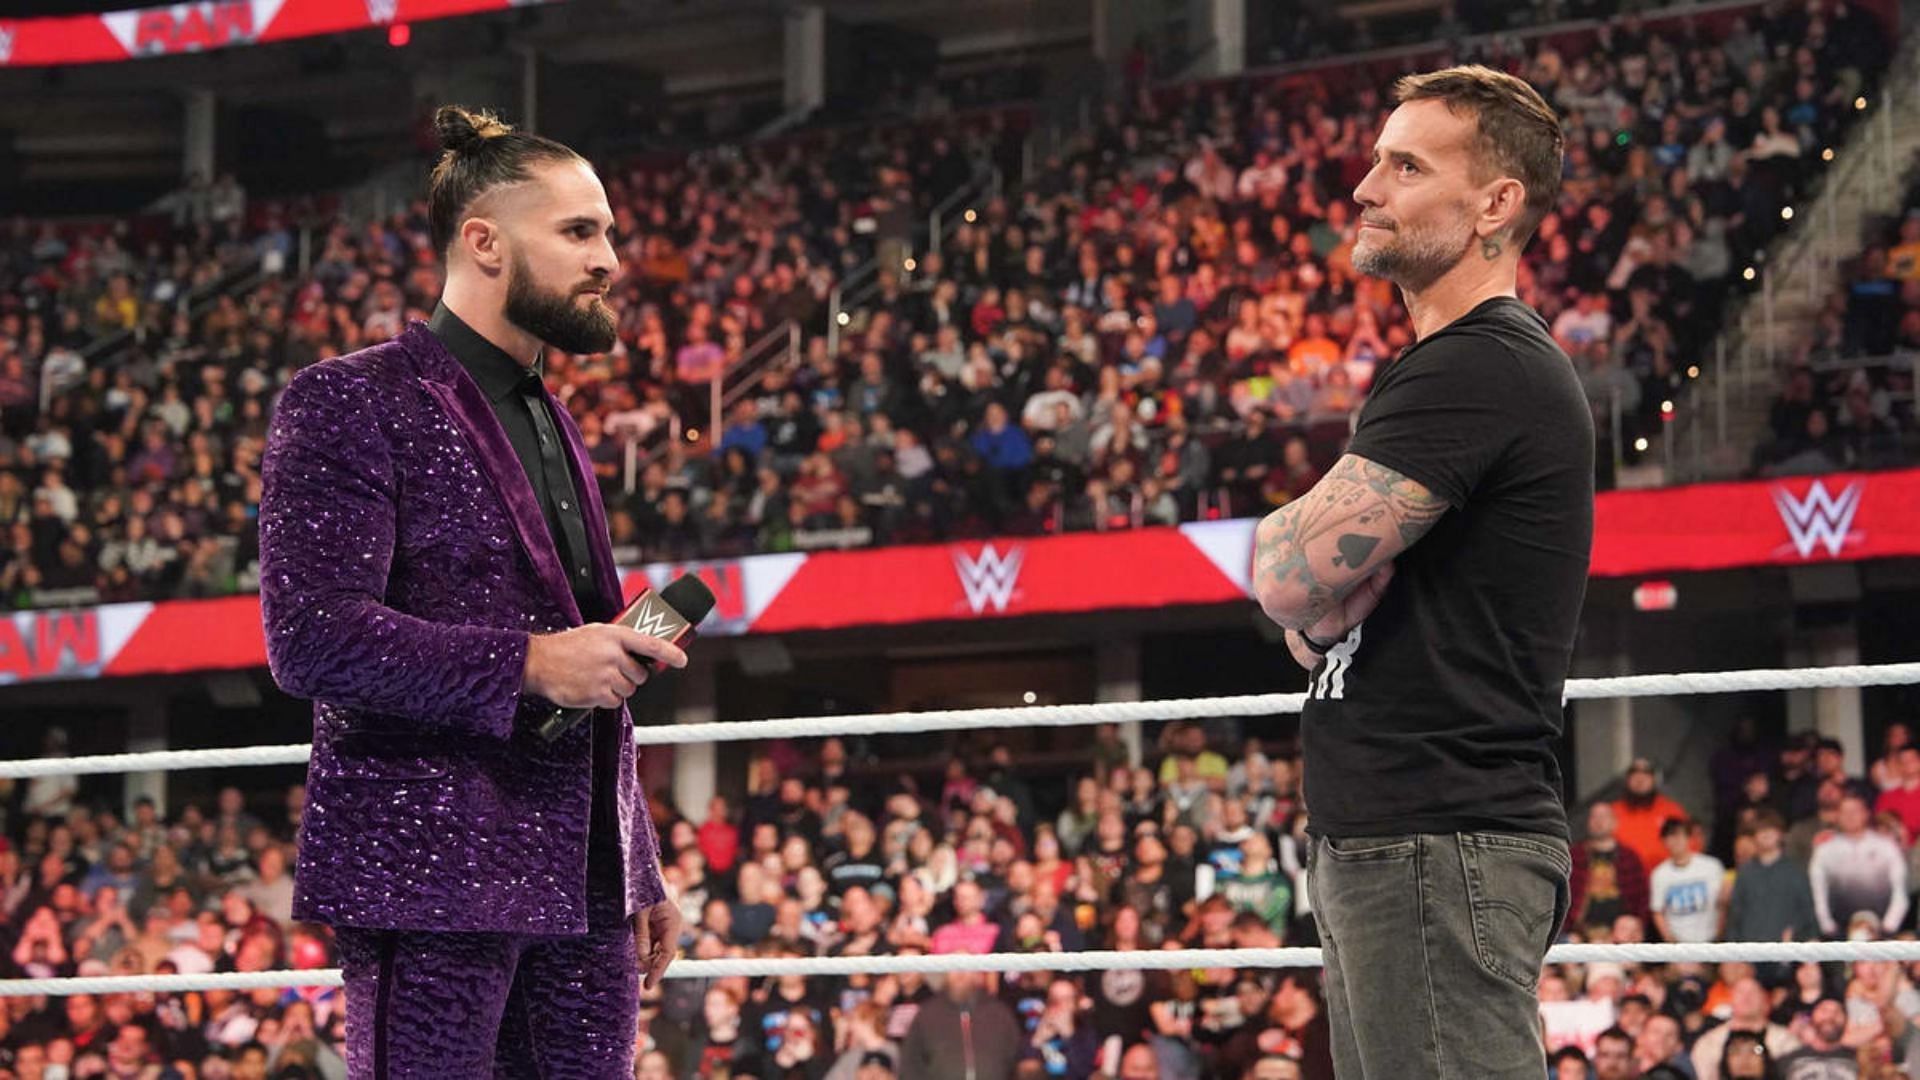 CM Punk vs. Seth Rollins is rumored for WrestleMania 40.